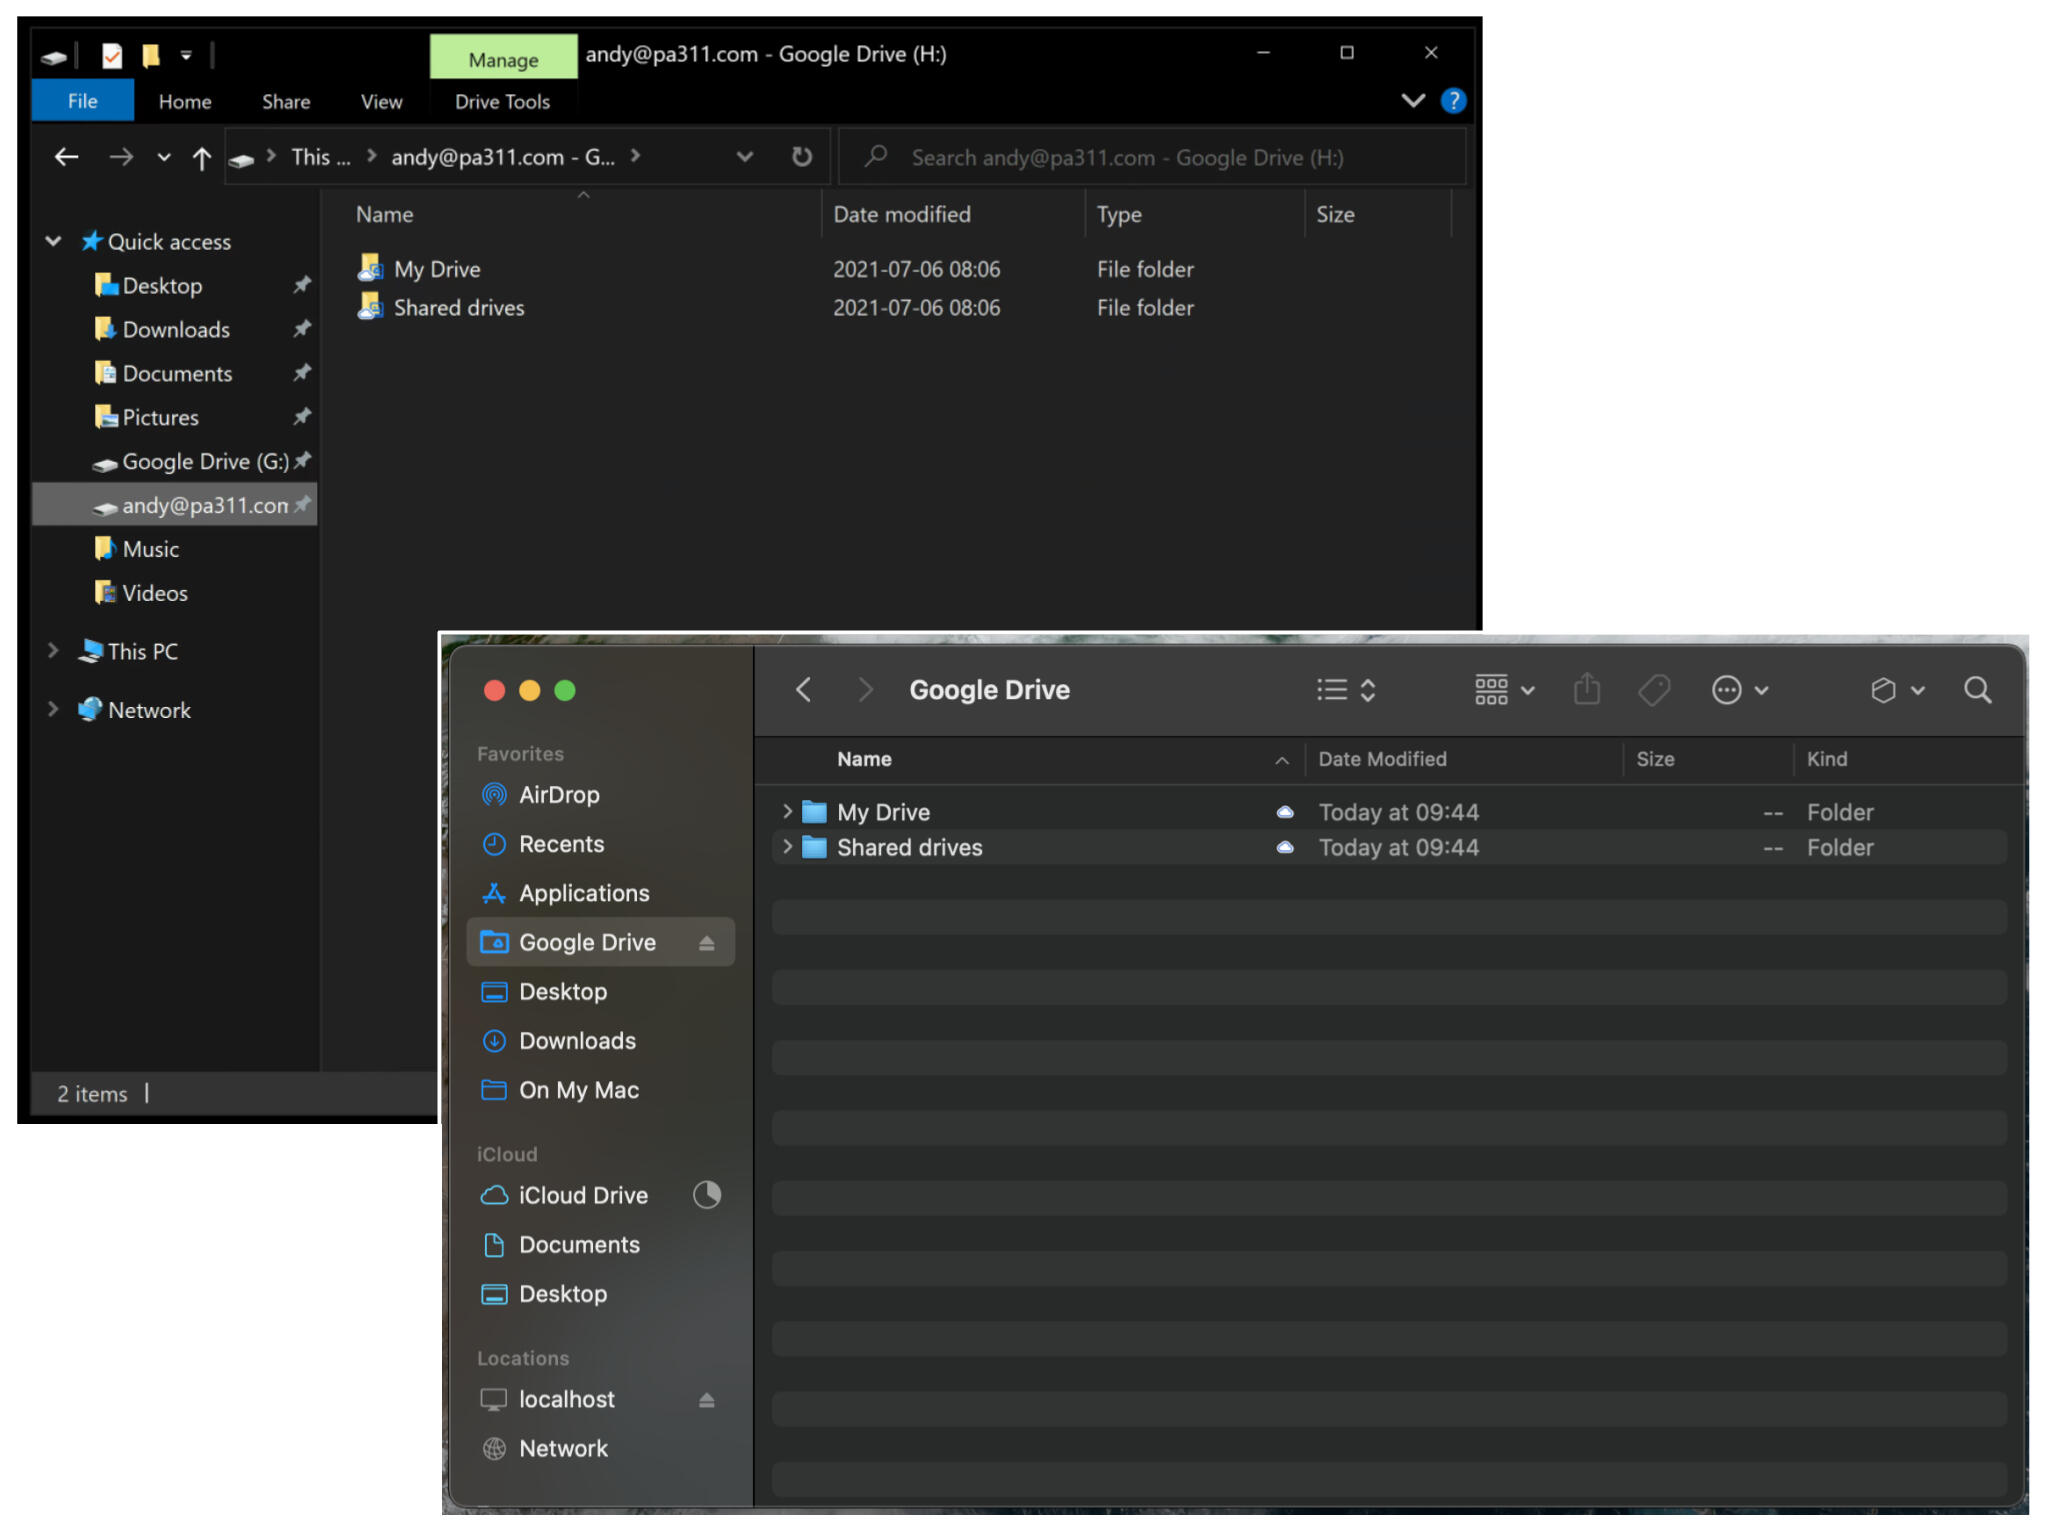 Upper left screenshot from Windows shows both a G: drive (for one Google account) and an H: drive (for a second Google account), with My Drive and Shared drives folders displayed. Lower right screenshot from macOS shows a single Google Drive, with My Drive and Shared drives folders displayed.